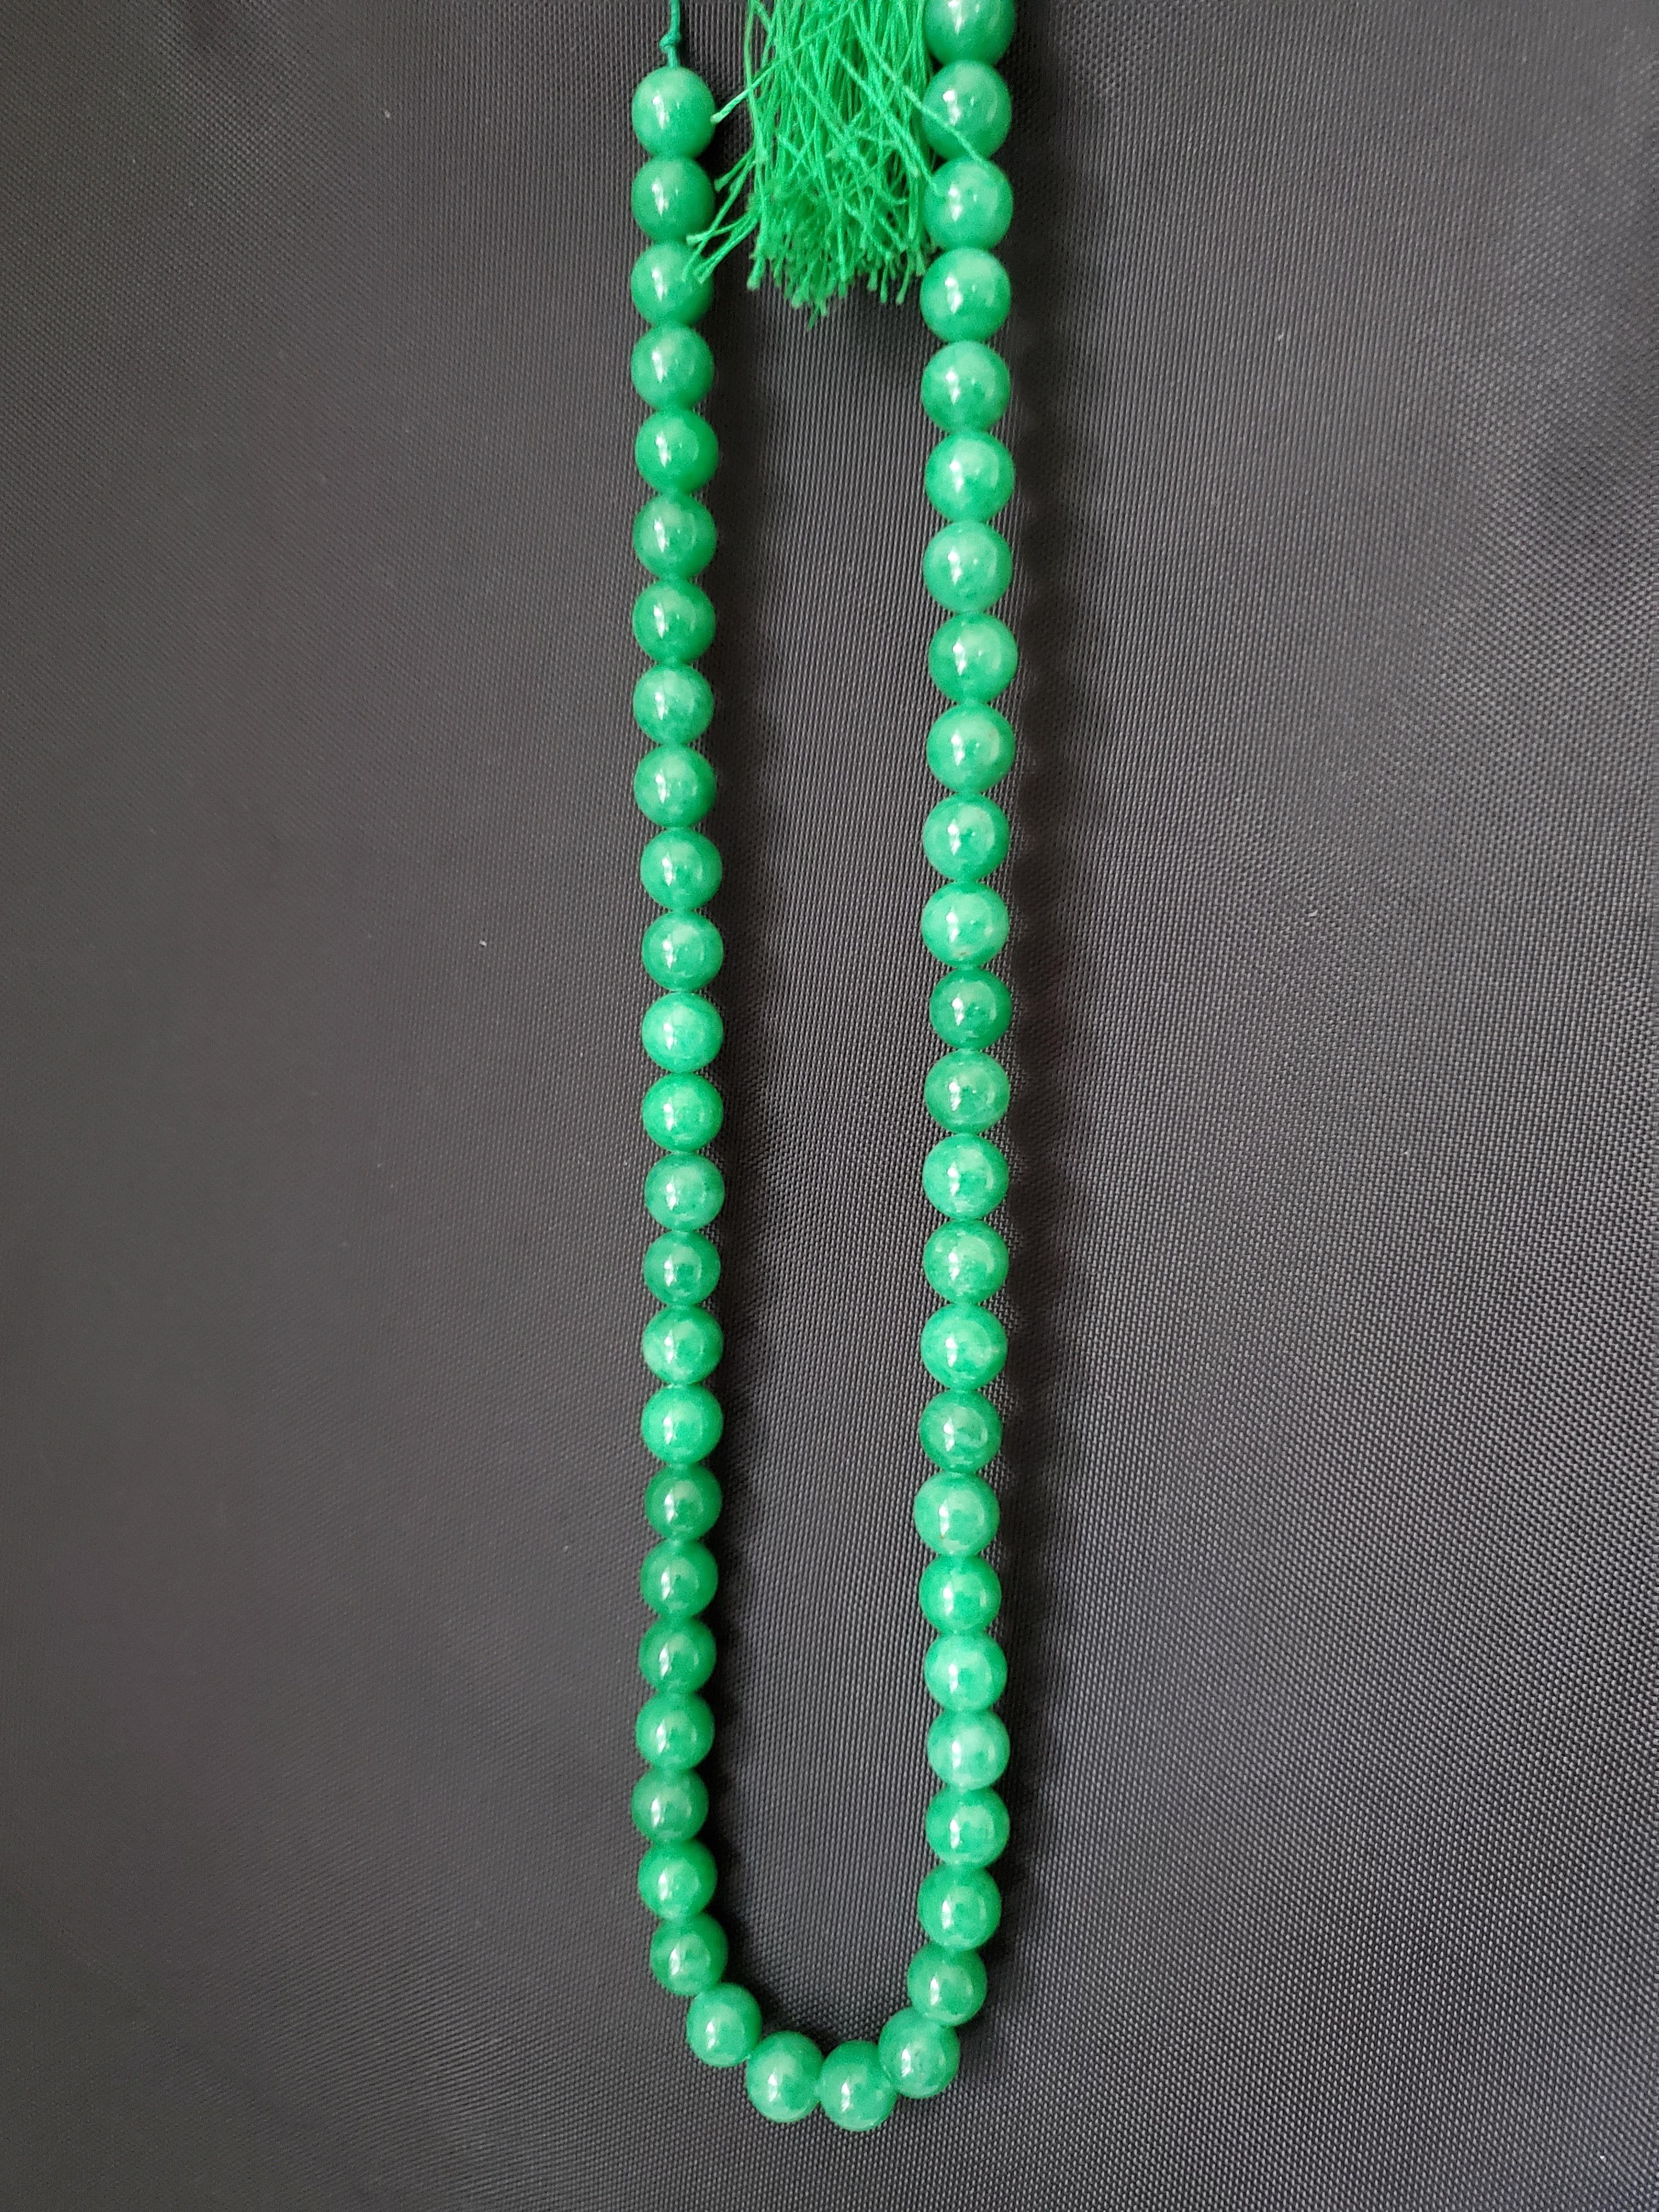 Chinese Export Vintage or Antique Emerald Green Jadeite Necklace, Mala, or Prayer Beads